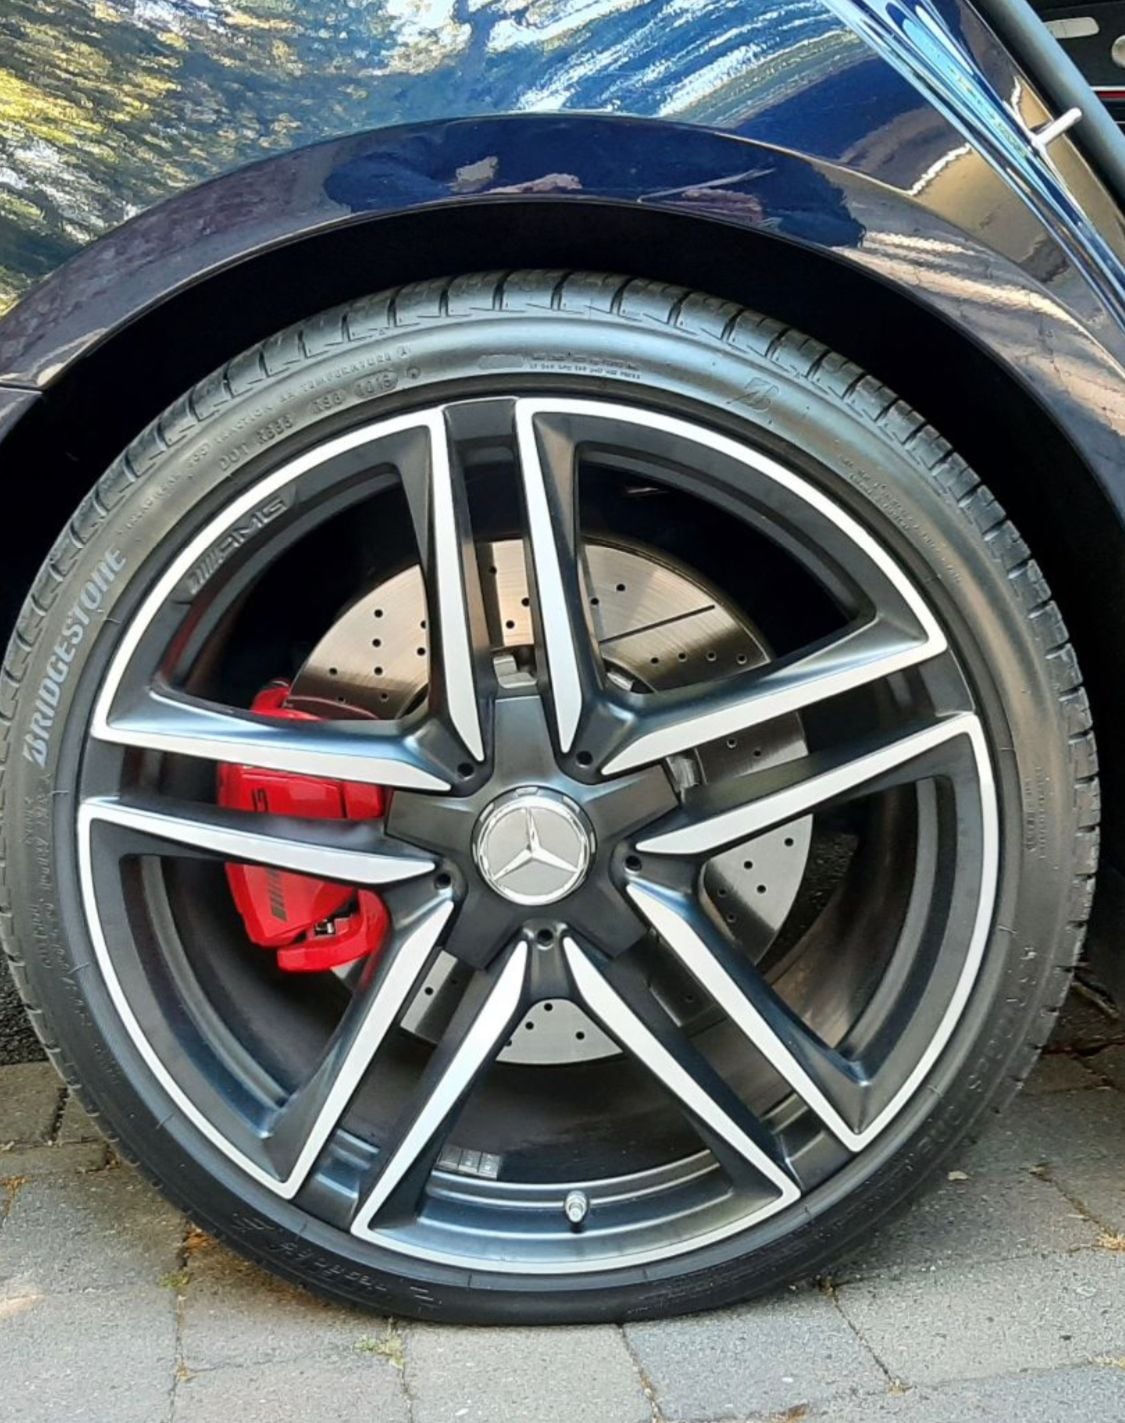 Wheels and Tires/Axles - W213 E63s Factory OEM 20” Wheels with Good A/S Tires - DC/MD/VA - Used - Washington, DC 20003, United States